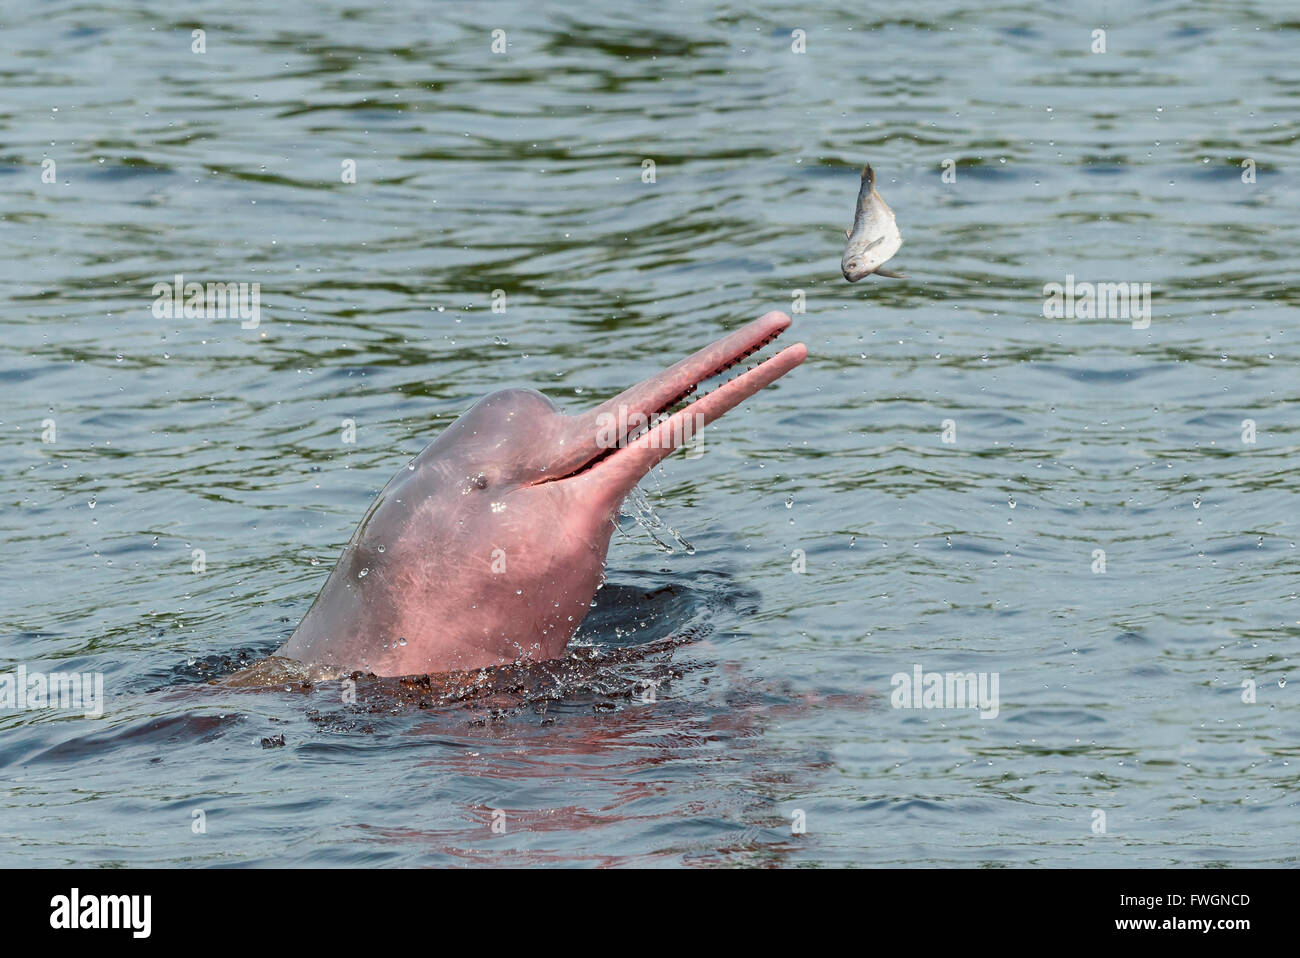 Amazon River Dolphin High Resolution Stock Photography and Images - Alamy